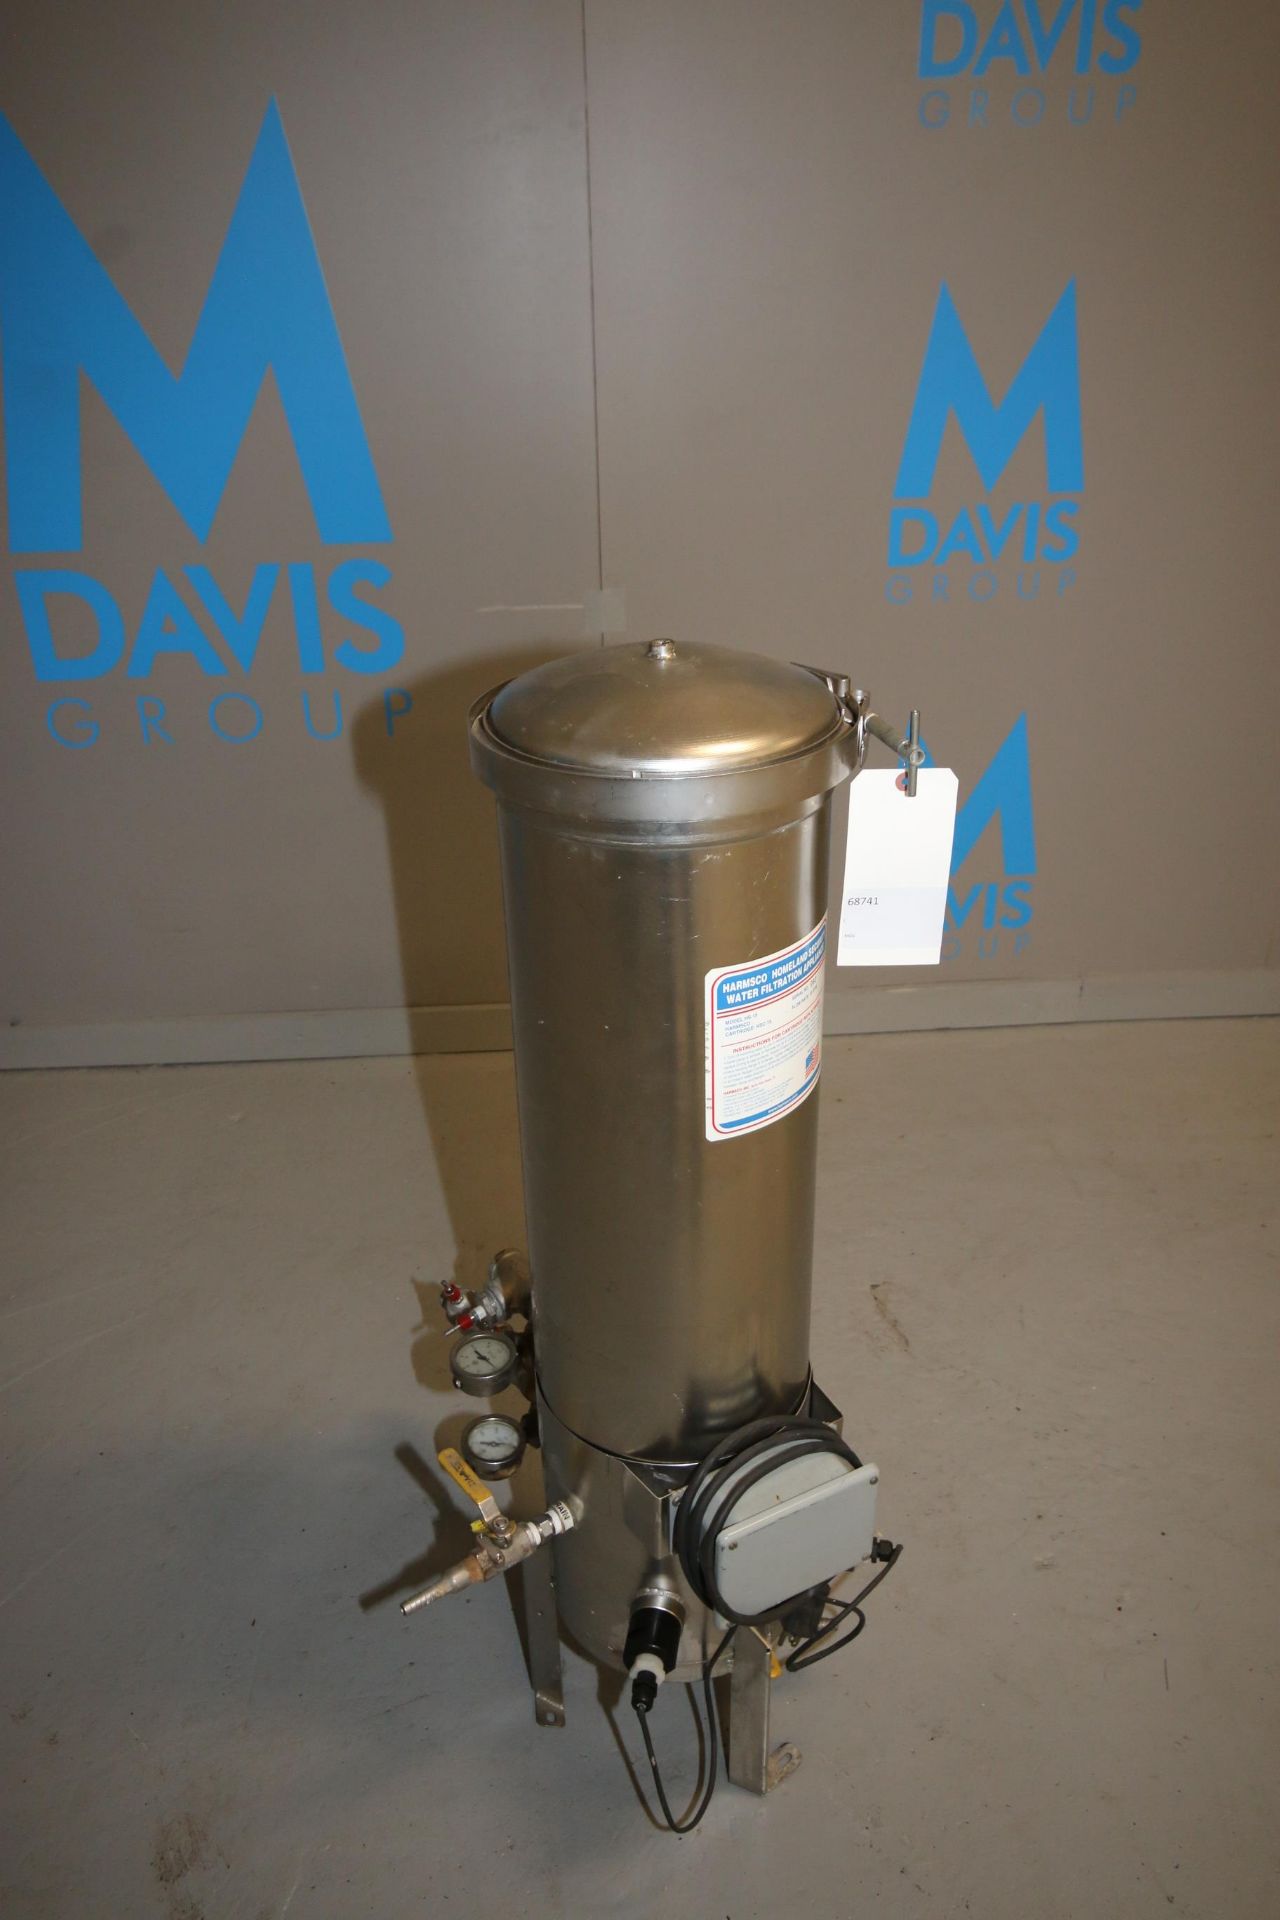 Harmsco S/S Water Filter, Model HS-15, SN 092, 15 GPM, with Valves & Gauges, Filter Dims.: Aprox. - Image 2 of 5